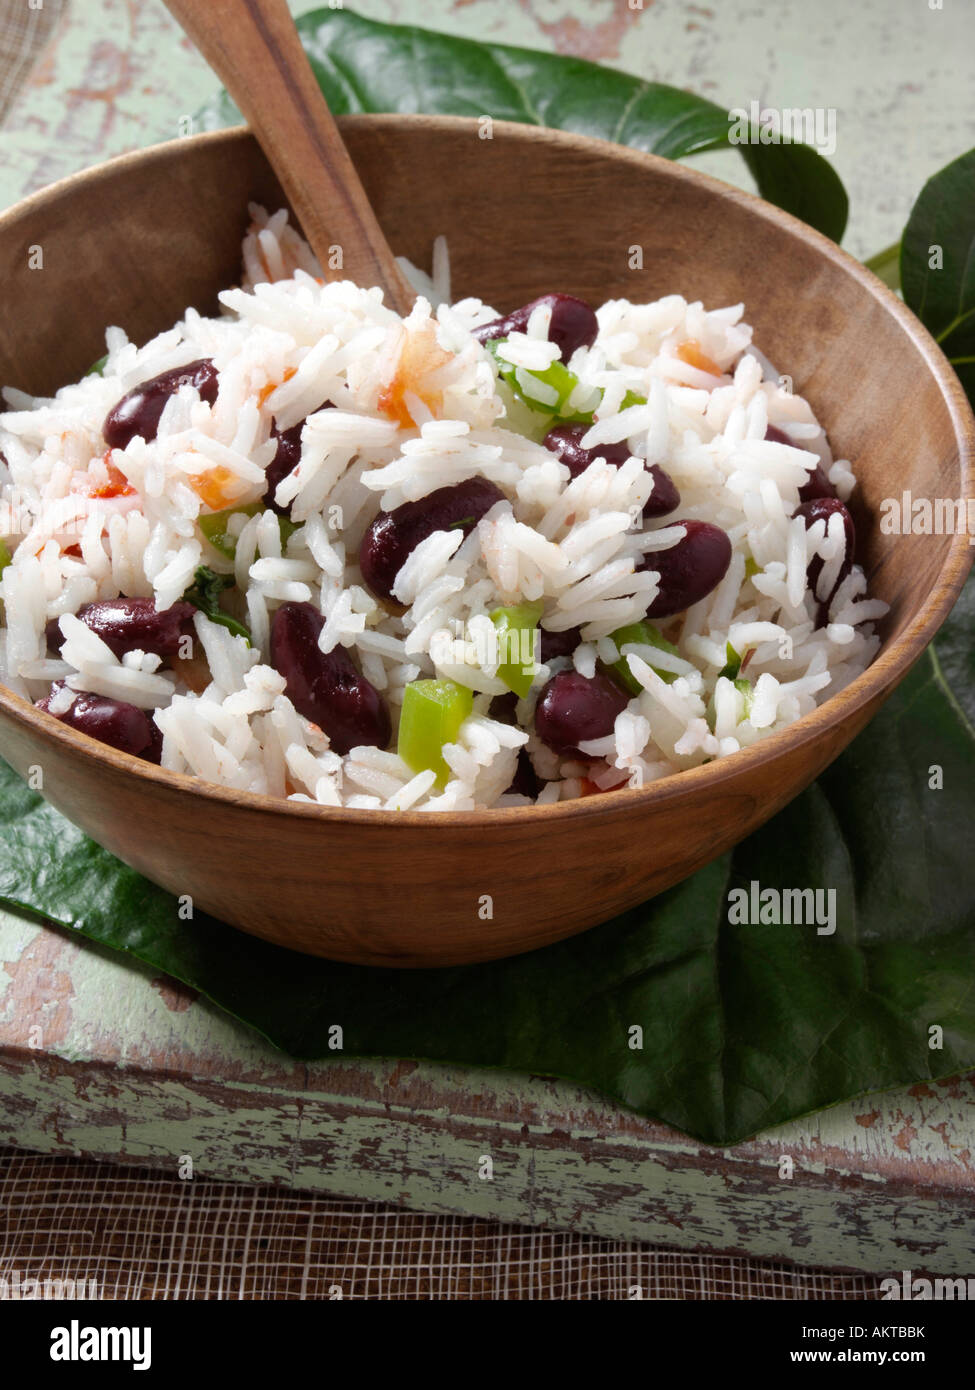 A bowl of Caribbean rice and peas editorial food Stock Photo